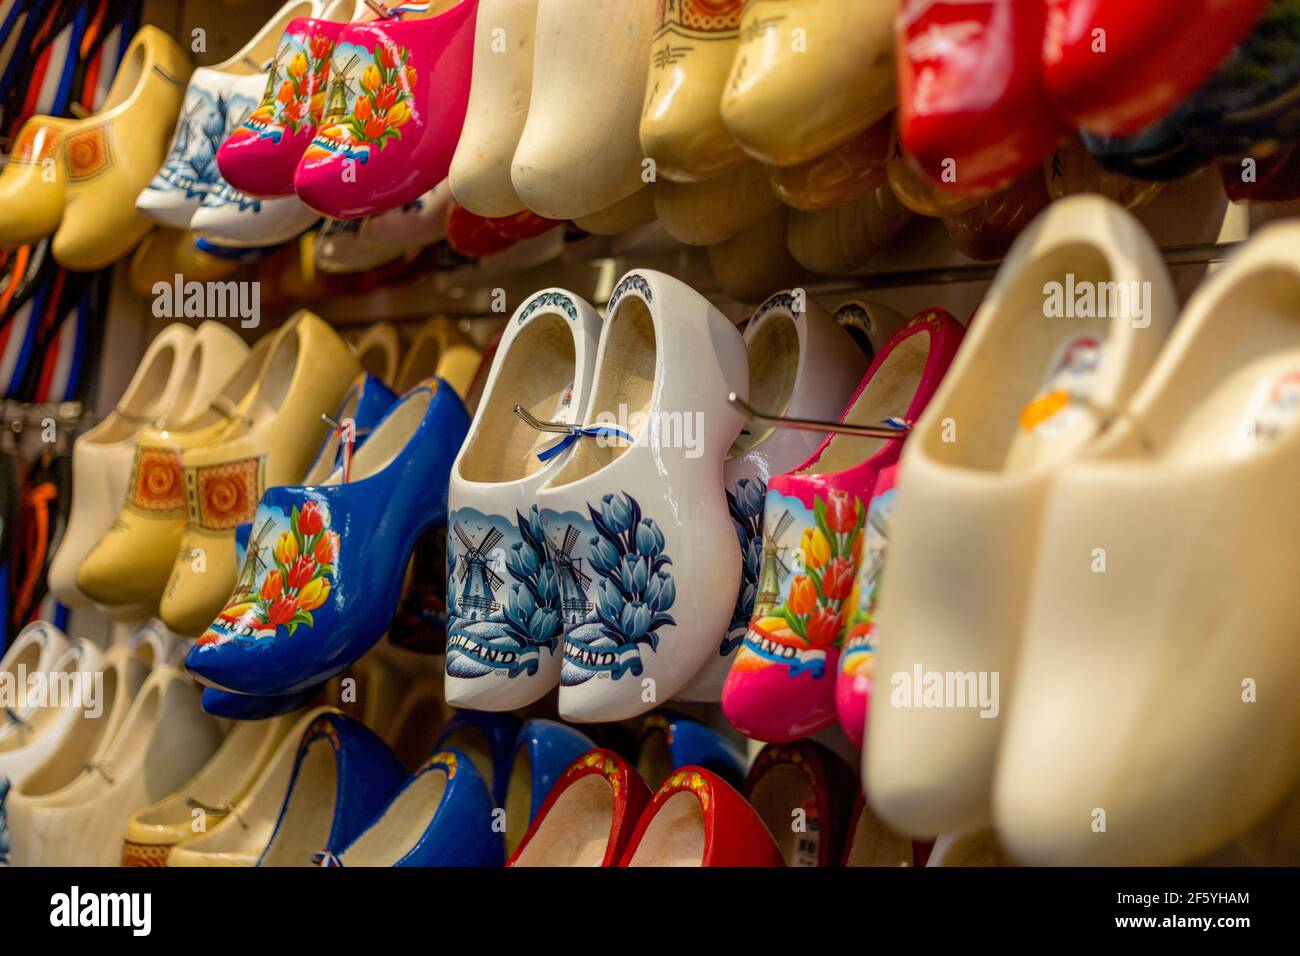 Amsterdam, Netherlands - July 02, 2018: Klomp - Dutch wooden shoes in the shop window Stock Photo